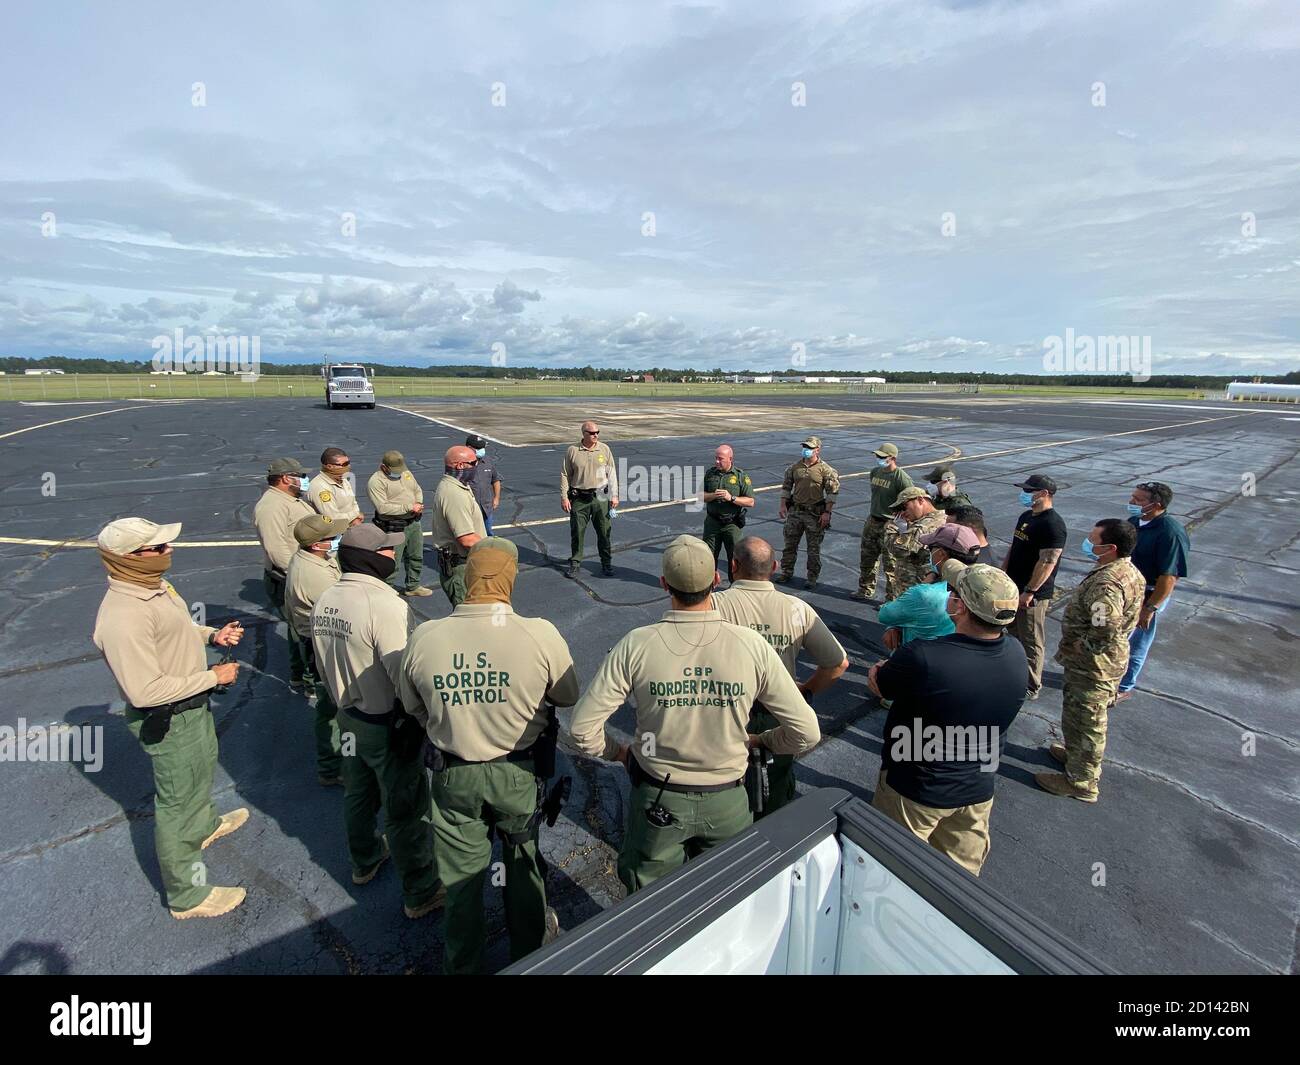 U.S. Border Patrol agents and boats arrive in Hammond, La, and attend an open air muster Sept. 15, 2020. The assets are being pre-positioned to provide response to the Gulf Coast region in advance of Hurricane Sally. Stock Photo